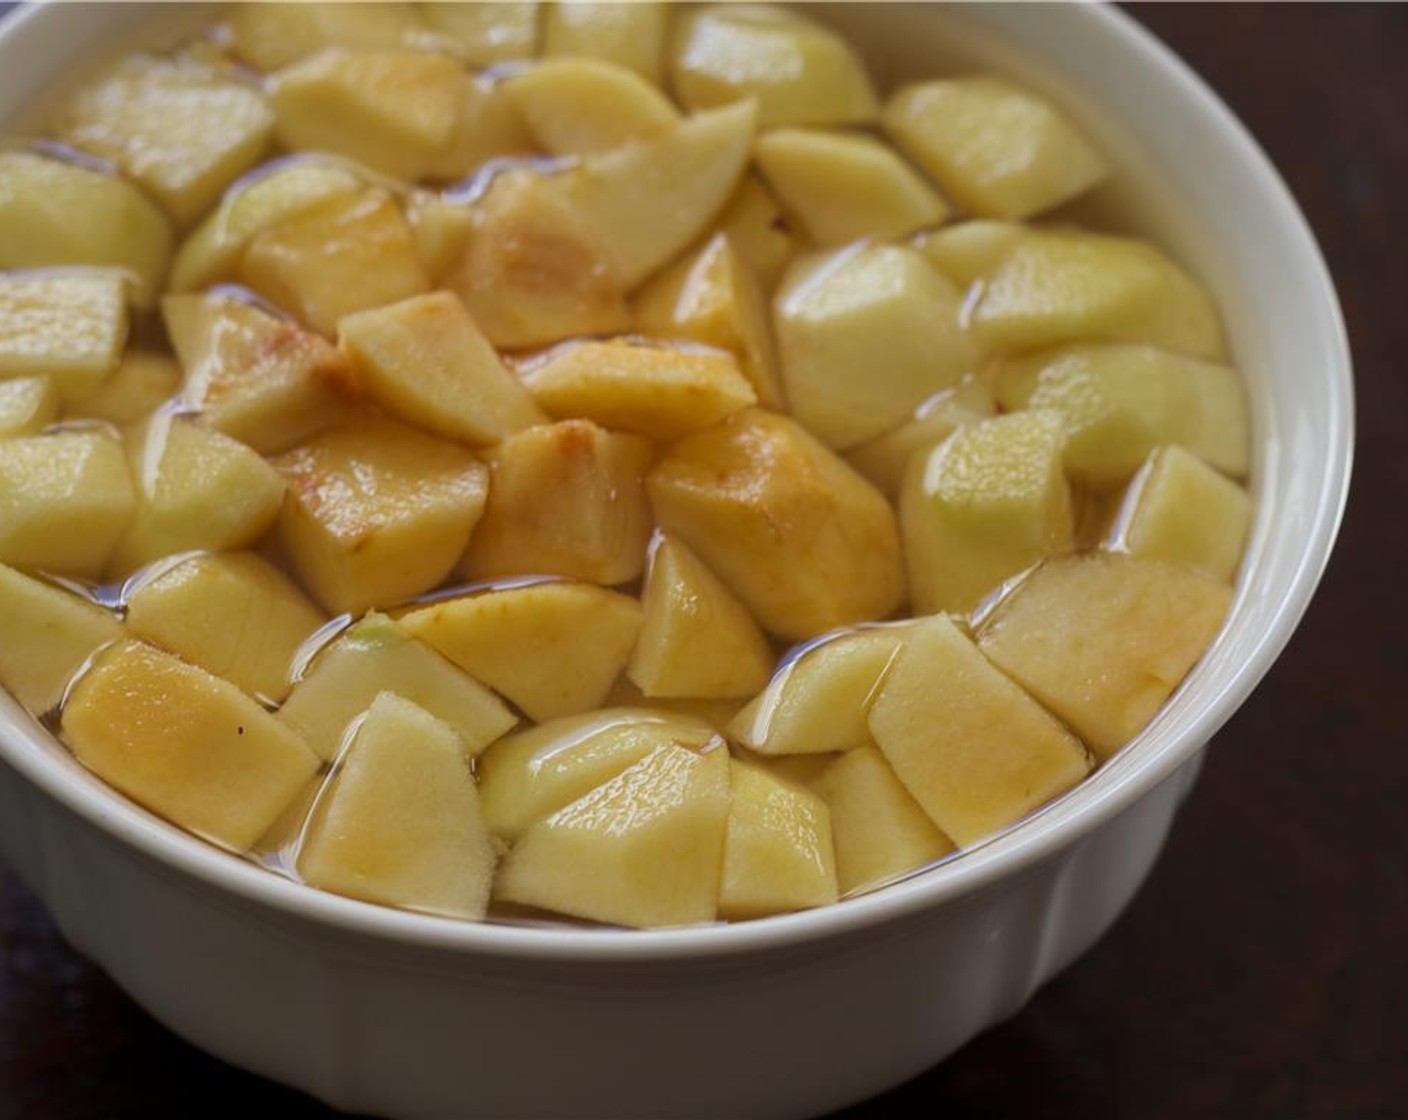 step 1 Preheat oven to 400 degrees F (200 degrees C). Cube the Apple (1) into half-inch pieces. Place them in a bowl of acidulated water (water with a tablespoon of lemon juice added to it. This keeps the apple from oxidizing while you prepare the other ingredients). Set aside.